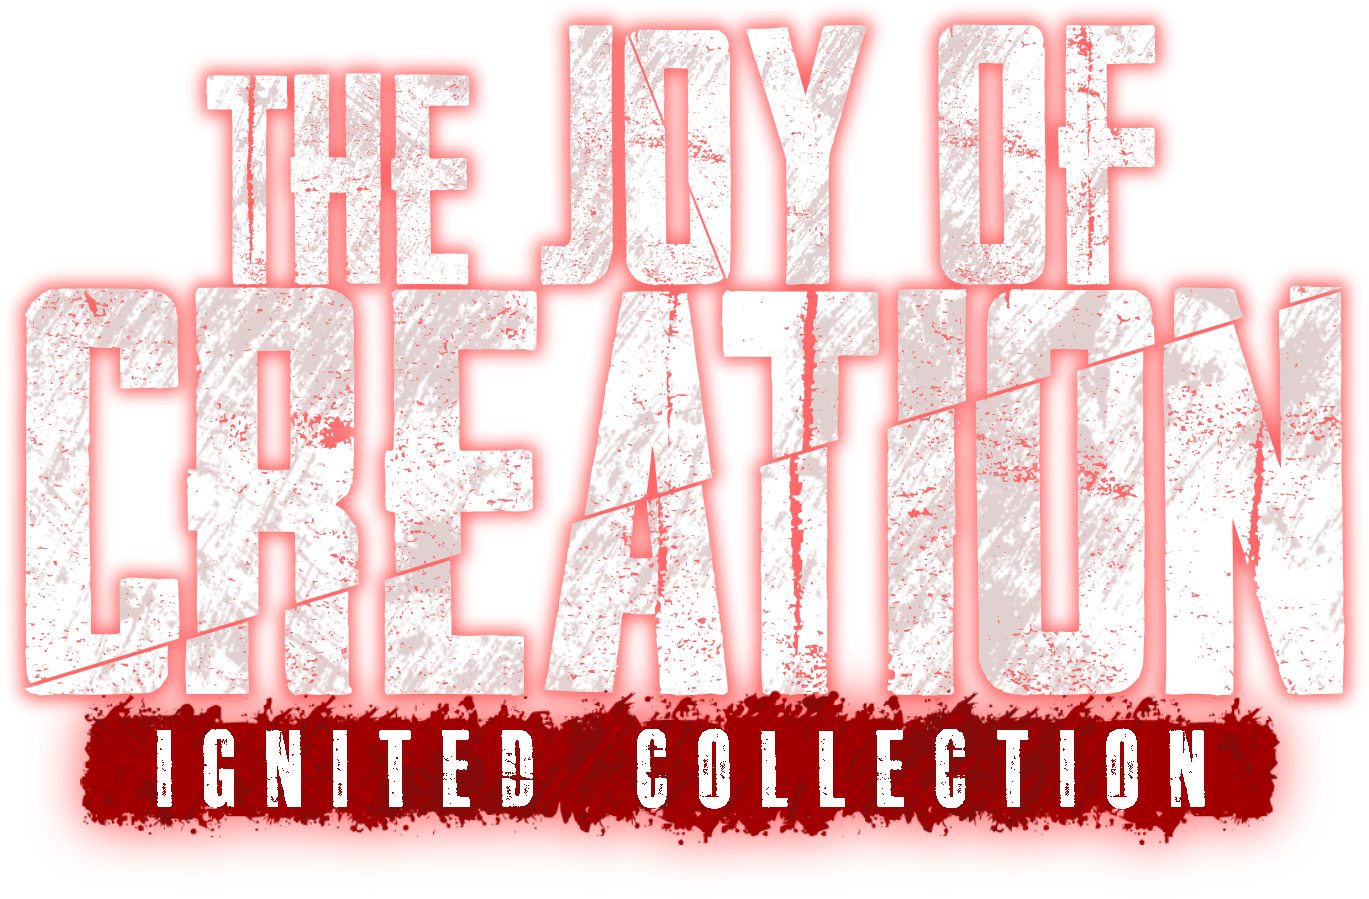 Stream The Joy of Creation: Ignited Collection Main menu Theme by